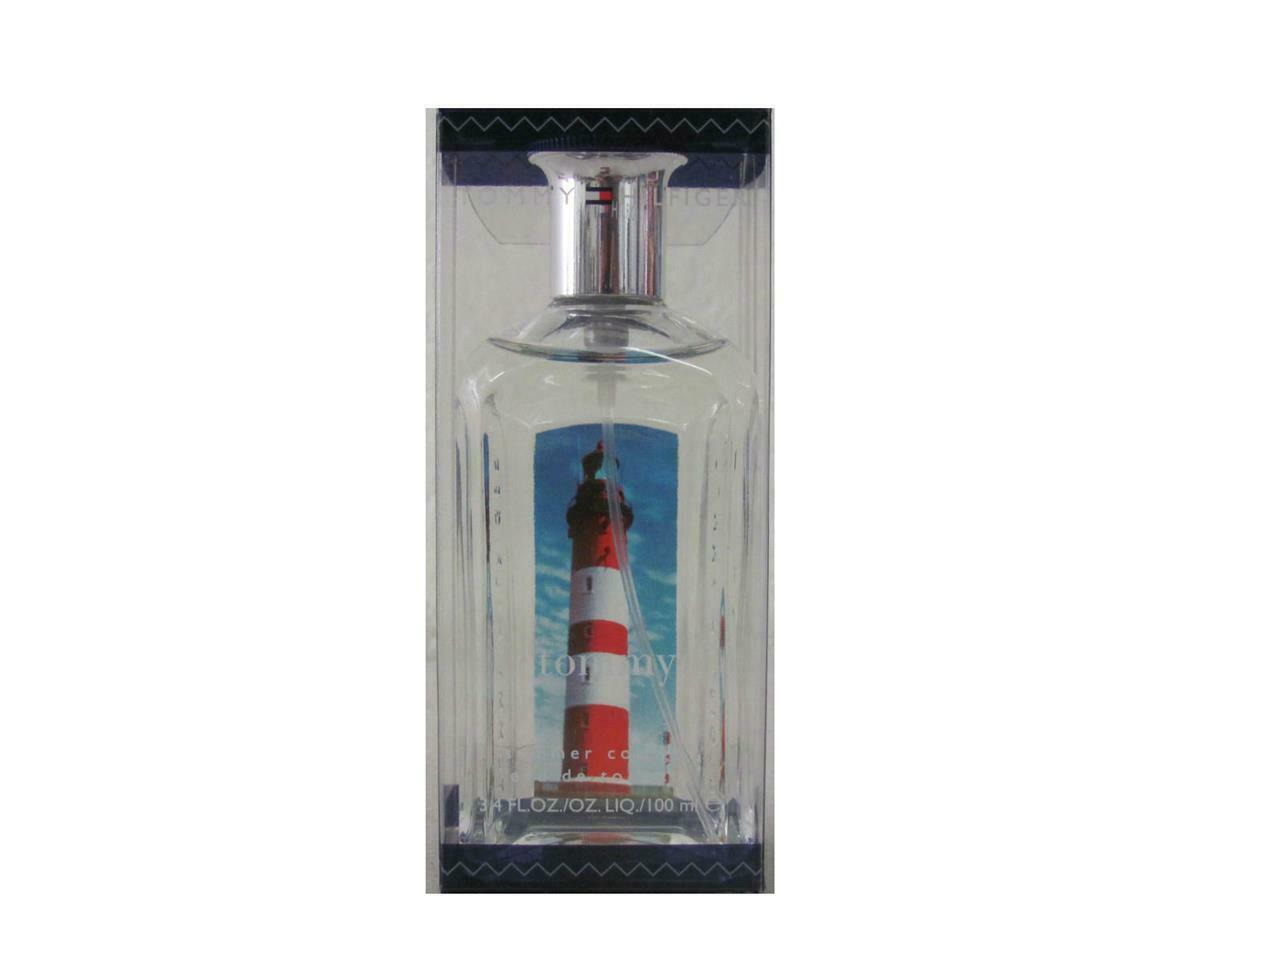 Primary image for Tommy Summer (2007) 3.4 oz EDT Spray for Men (New In Box) by Tommy Hilfiger